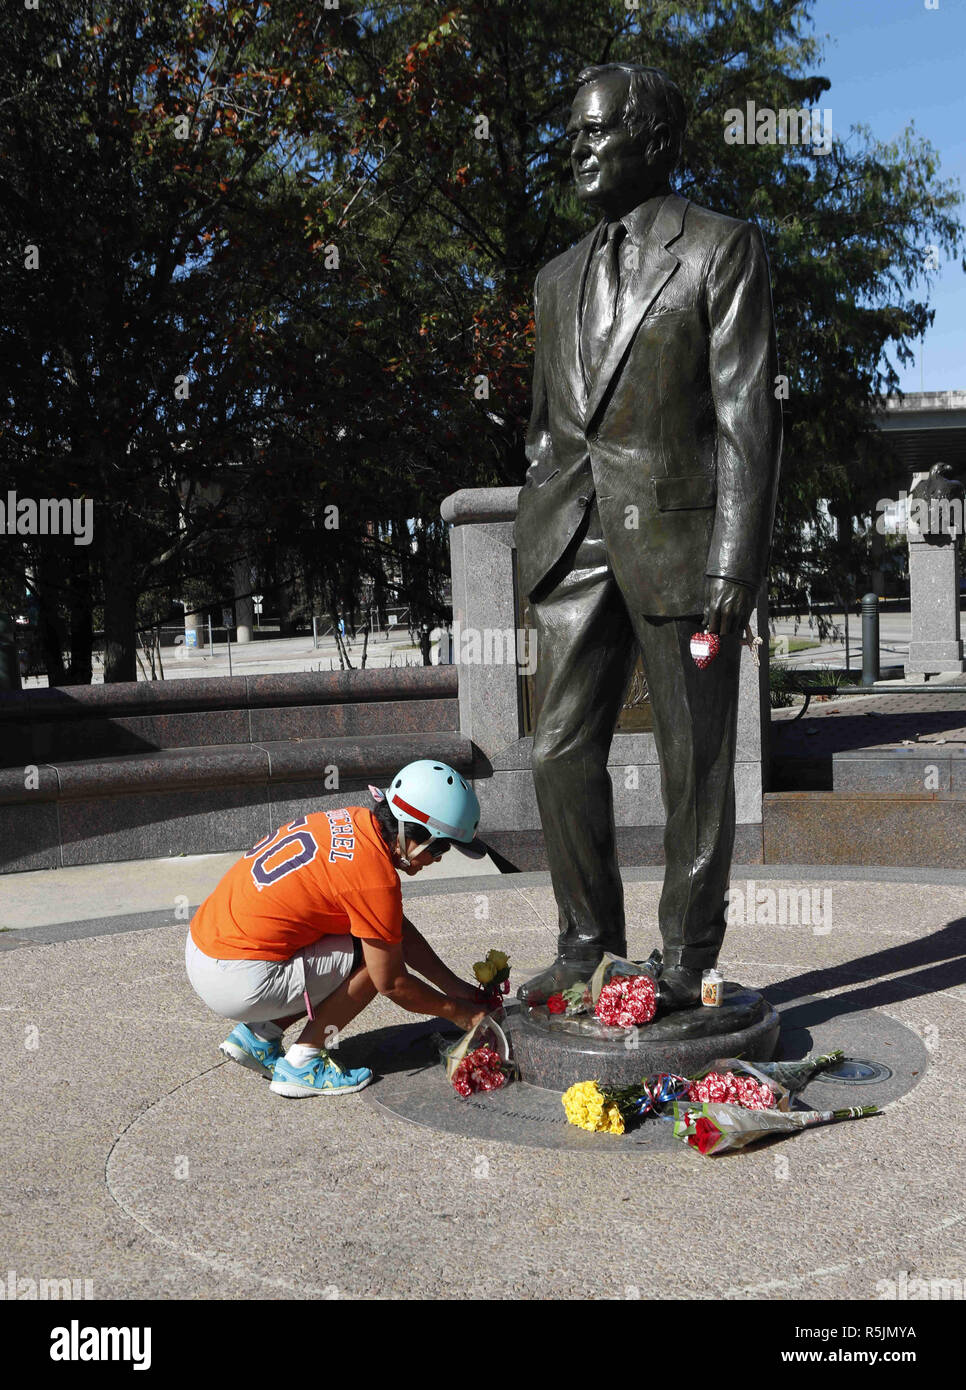 Houston, USA. 1st Dec, 2018. A citizen lays flowers in front of a statue of former U.S. President George H.W. Bush in Houston, Texas, the United States, on Dec. 1, 2018. George H.W. Bush, the 41st president of the United States, has died Friday at the age of 94, according to a statement from his office. Credit: Steven Song/Xinhua/Alamy Live News Stock Photo